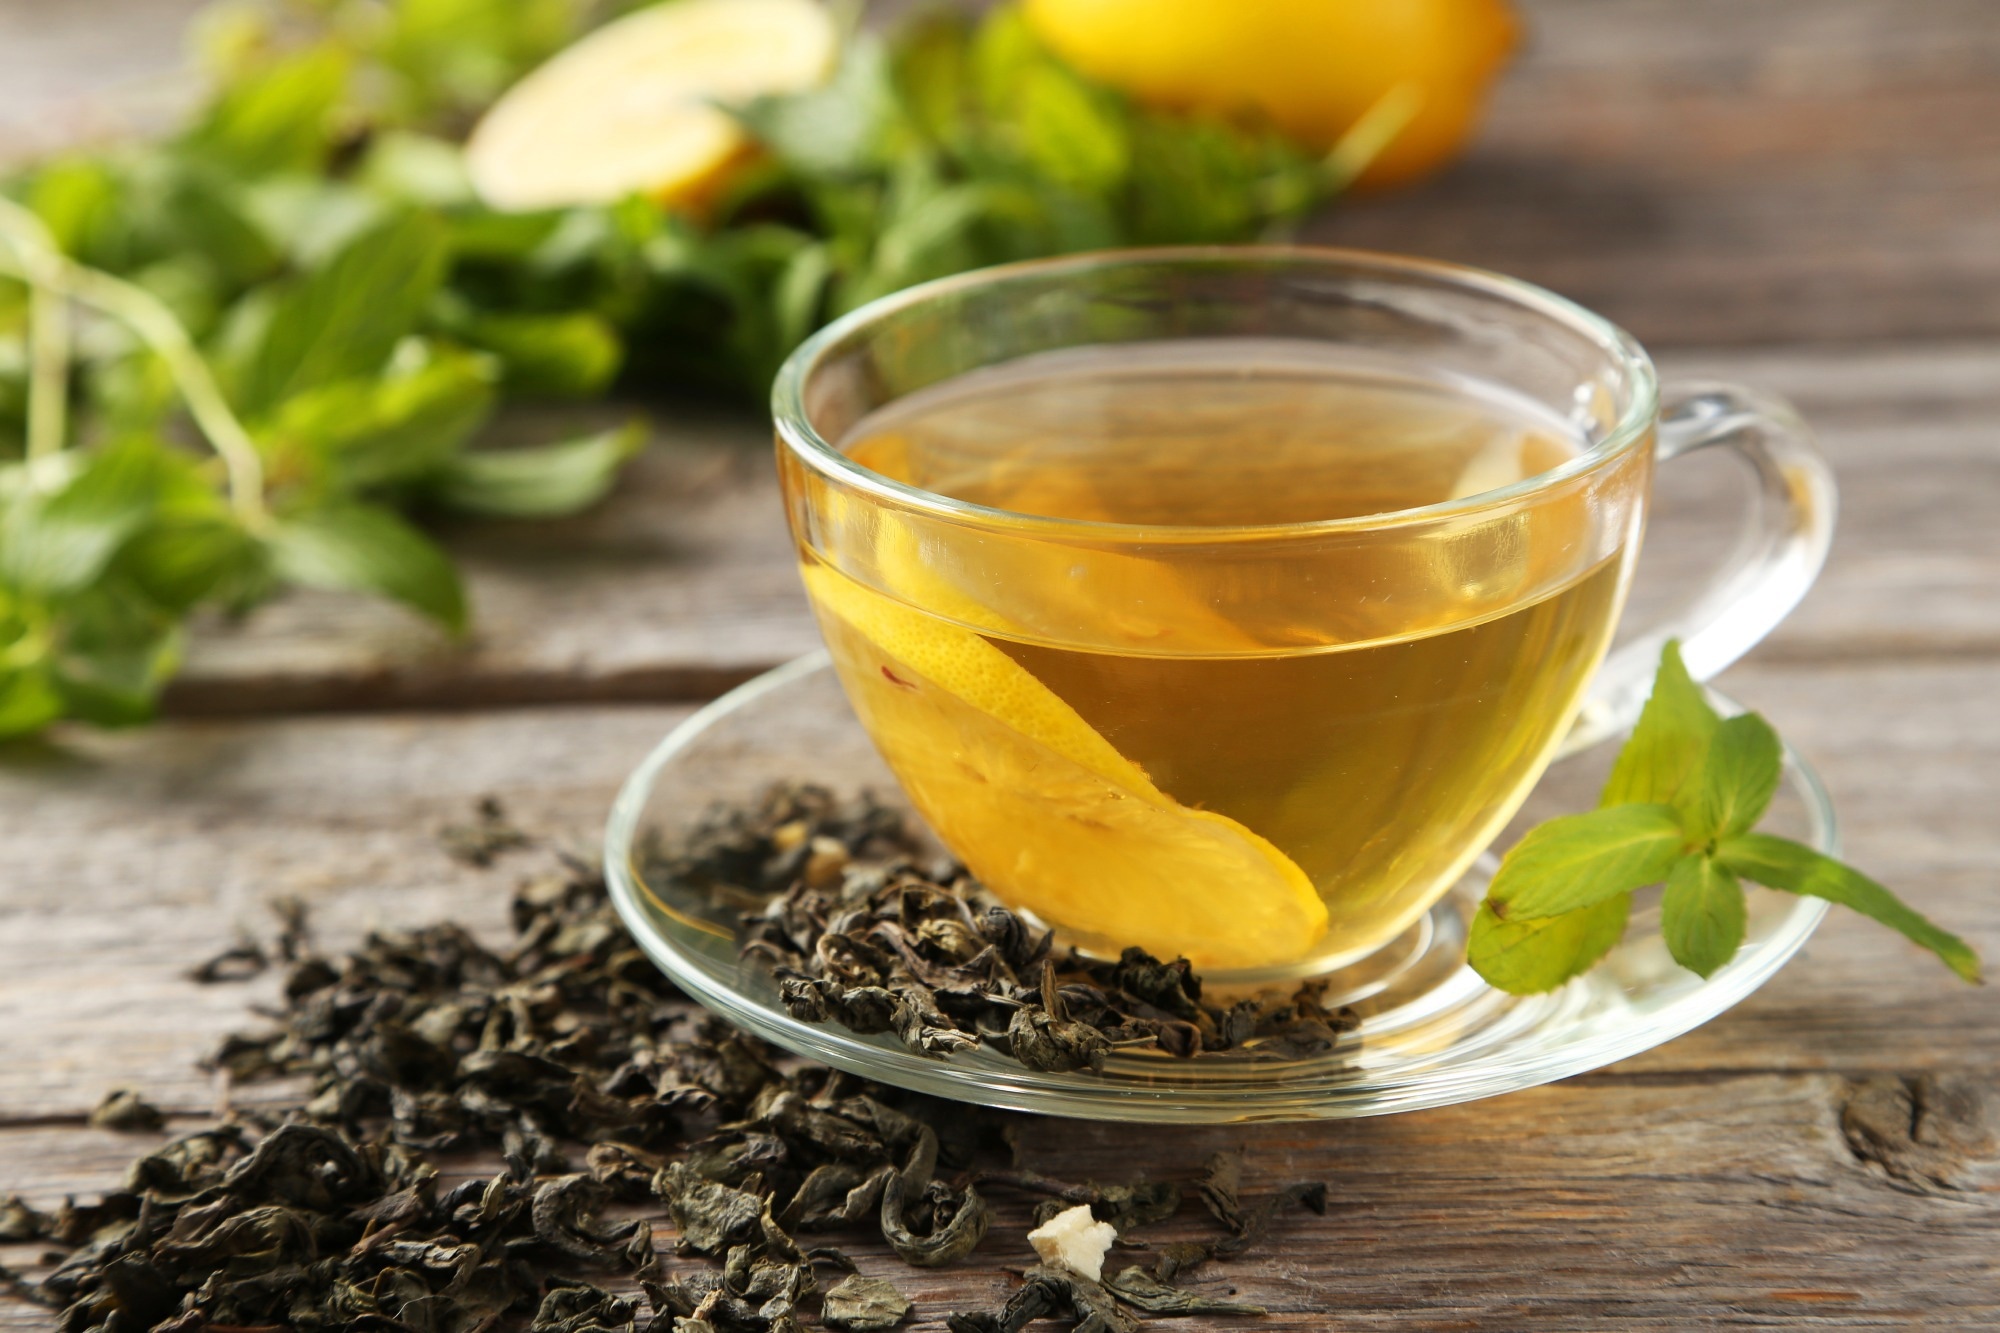 Study: Investigating the potential causal association between consumption of green tea and risk of lung cancer: a study utilizing Mendelian randomization. Image Credit: 5secondStudio/Shutterstock.com